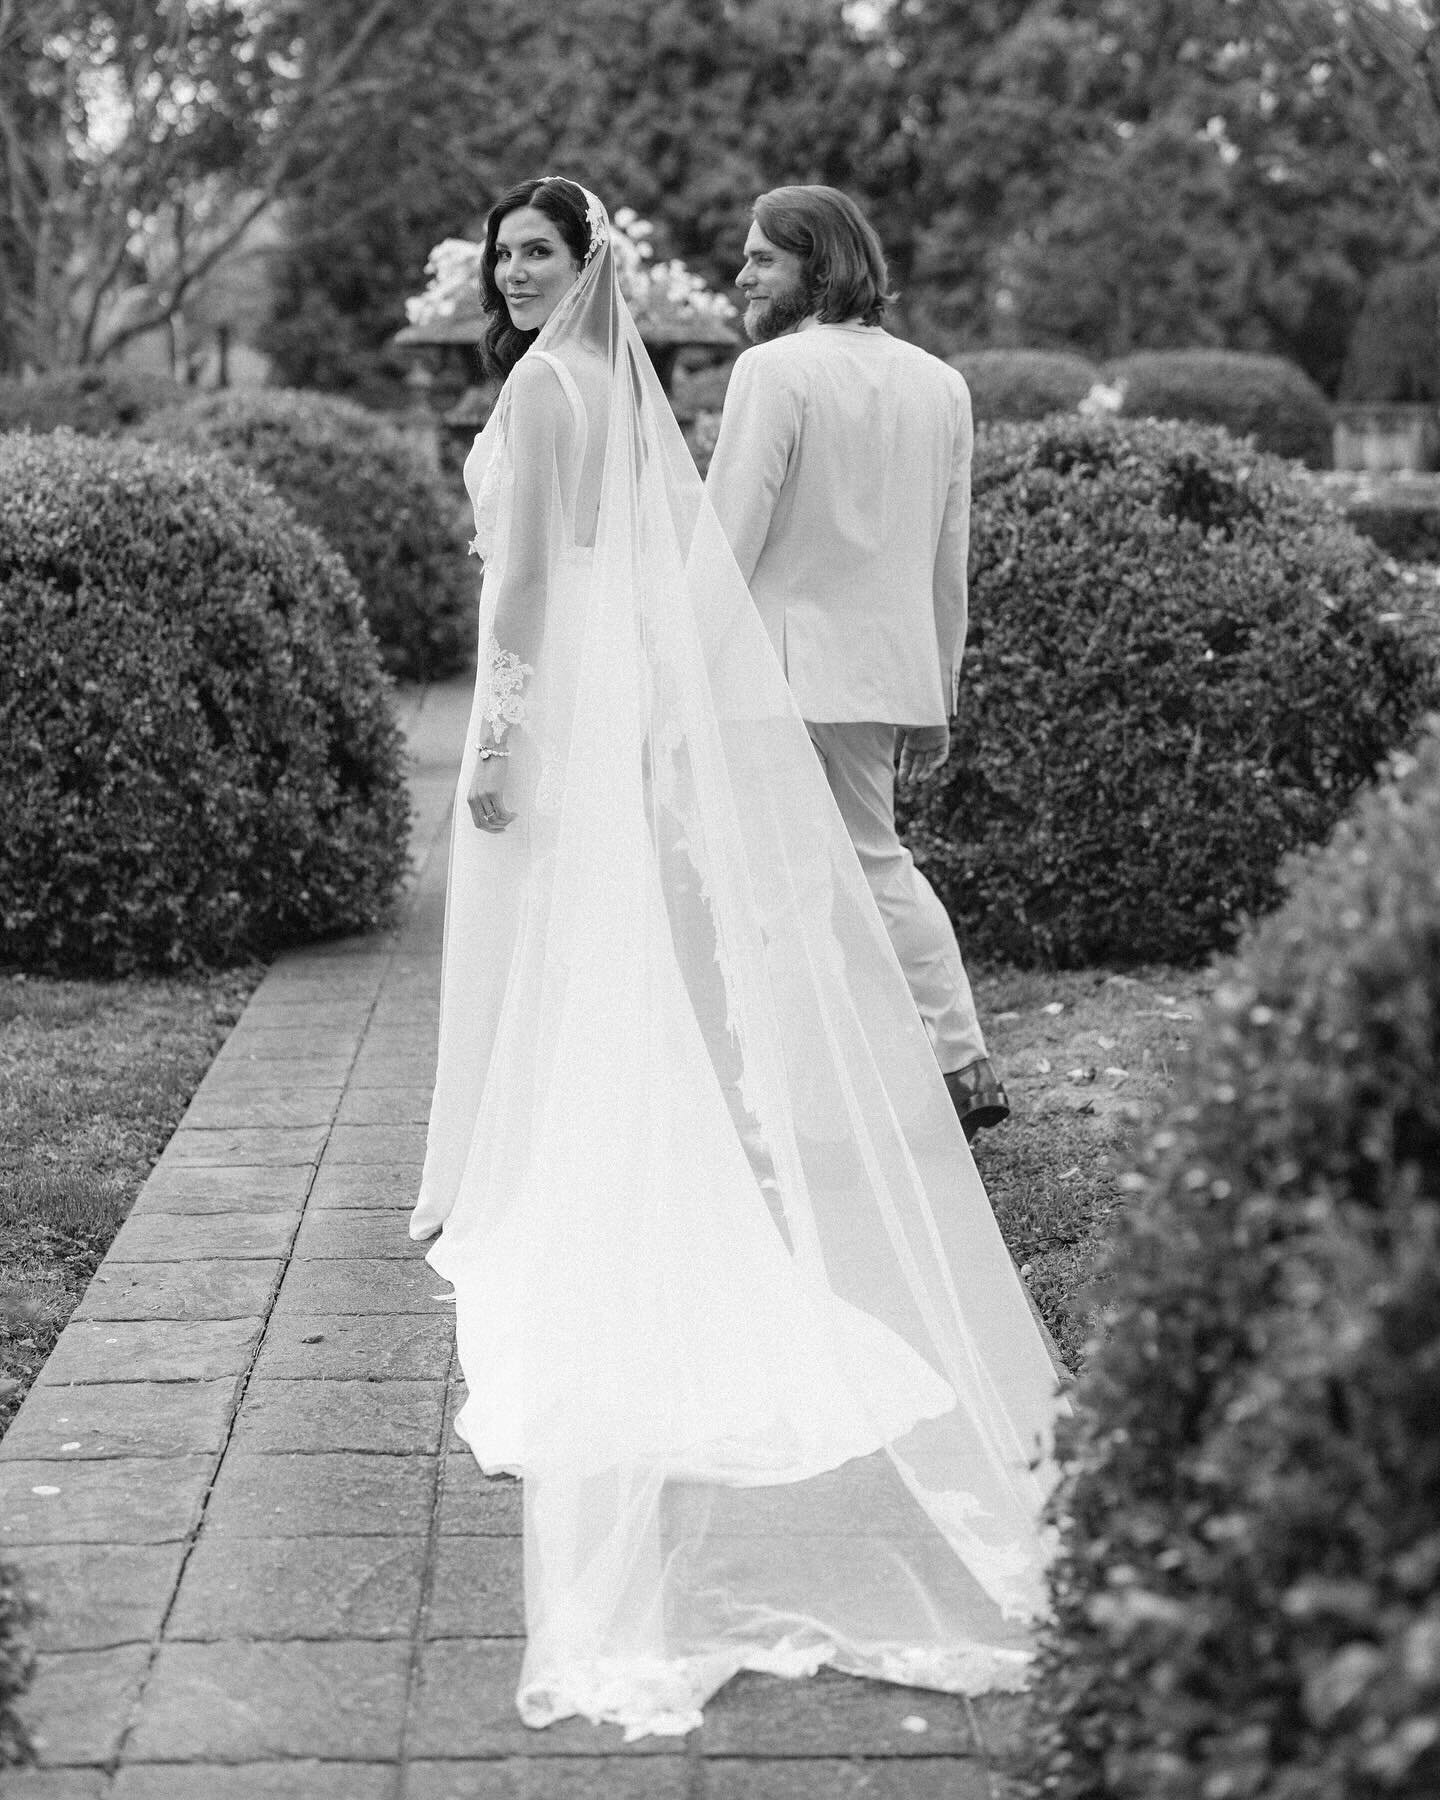 The Veil: a 10-photo essay. Loved this beauty on the stunning @alexcassidyky last spring. 
&bull;&bull;&bull;
Planning and design:&nbsp;@christinaburtonevents
Photography:&nbsp;@l_slierodriguez
Venue:&nbsp;@whitehall_house_gardens
Hair/Makeup:&nbsp;@